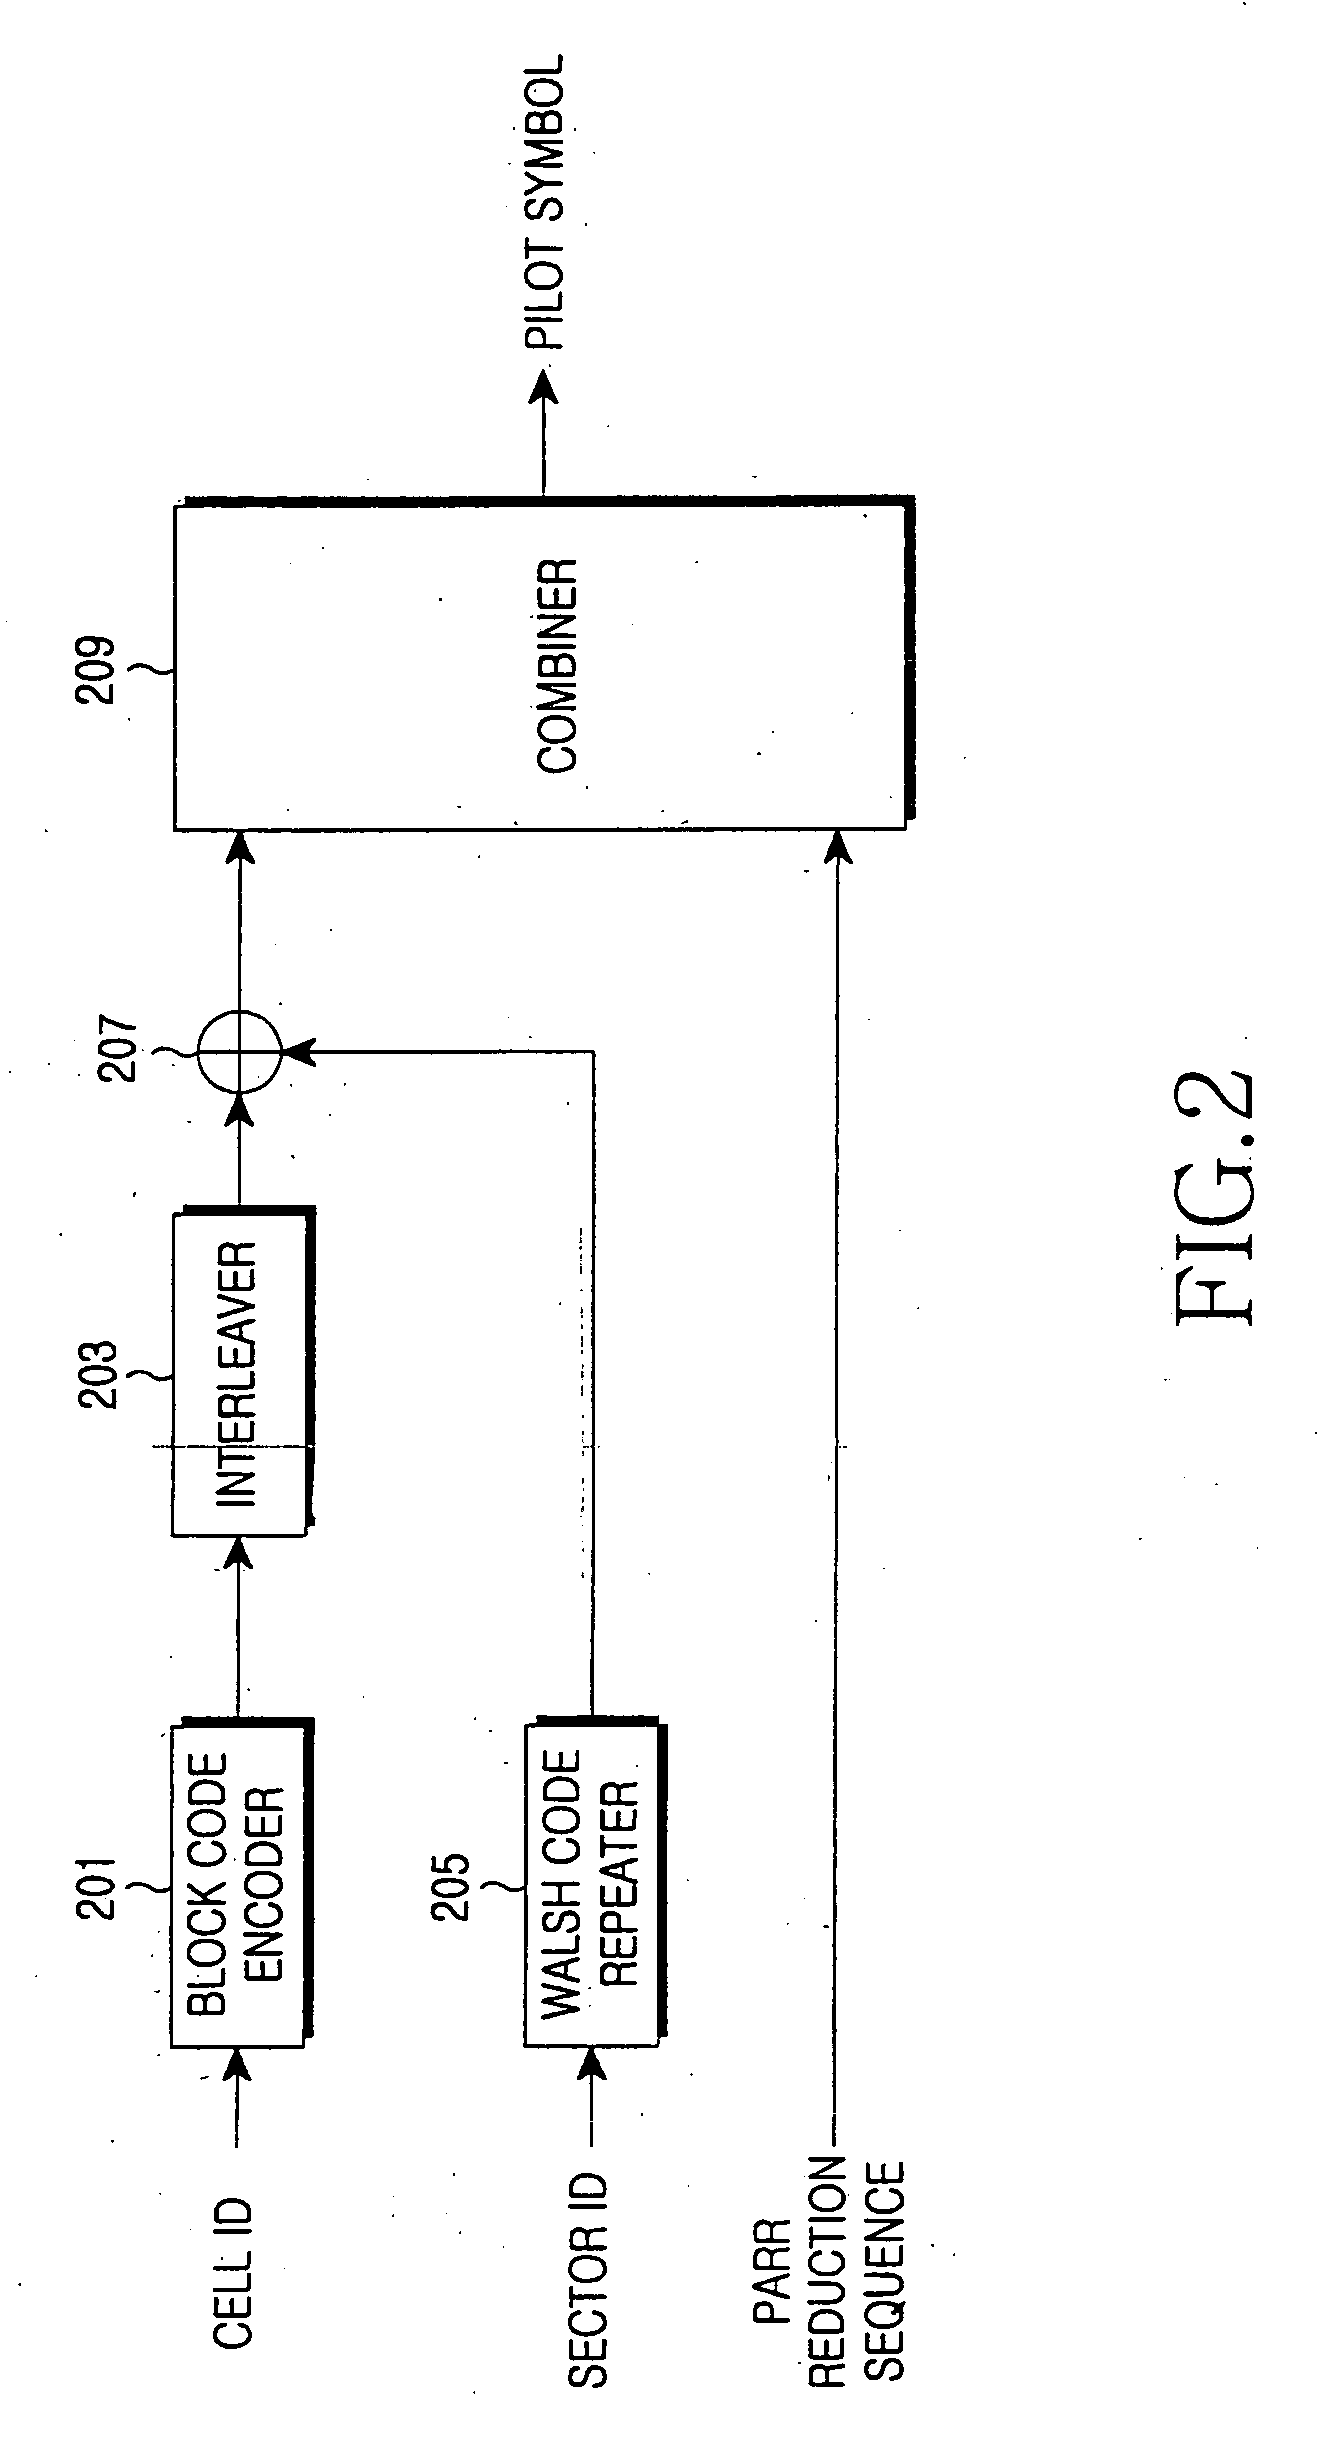 Apparatus and method for transmitting/receiving pilot signals in a communication system using an orthogonal frequency division multiplexing scheme